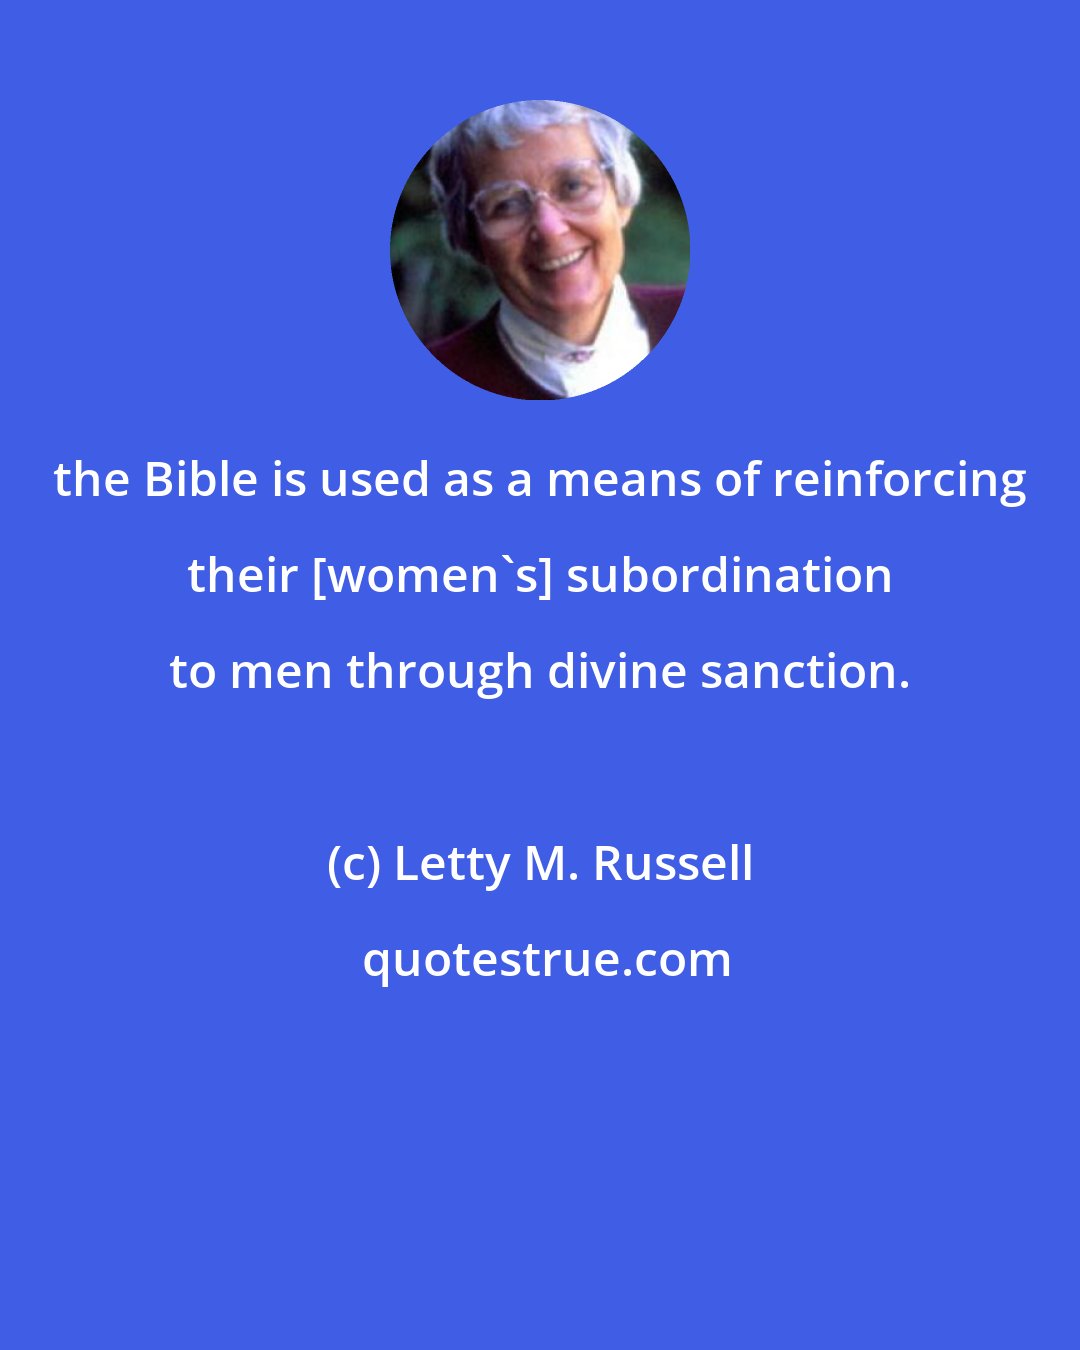 Letty M. Russell: the Bible is used as a means of reinforcing their [women's] subordination to men through divine sanction.